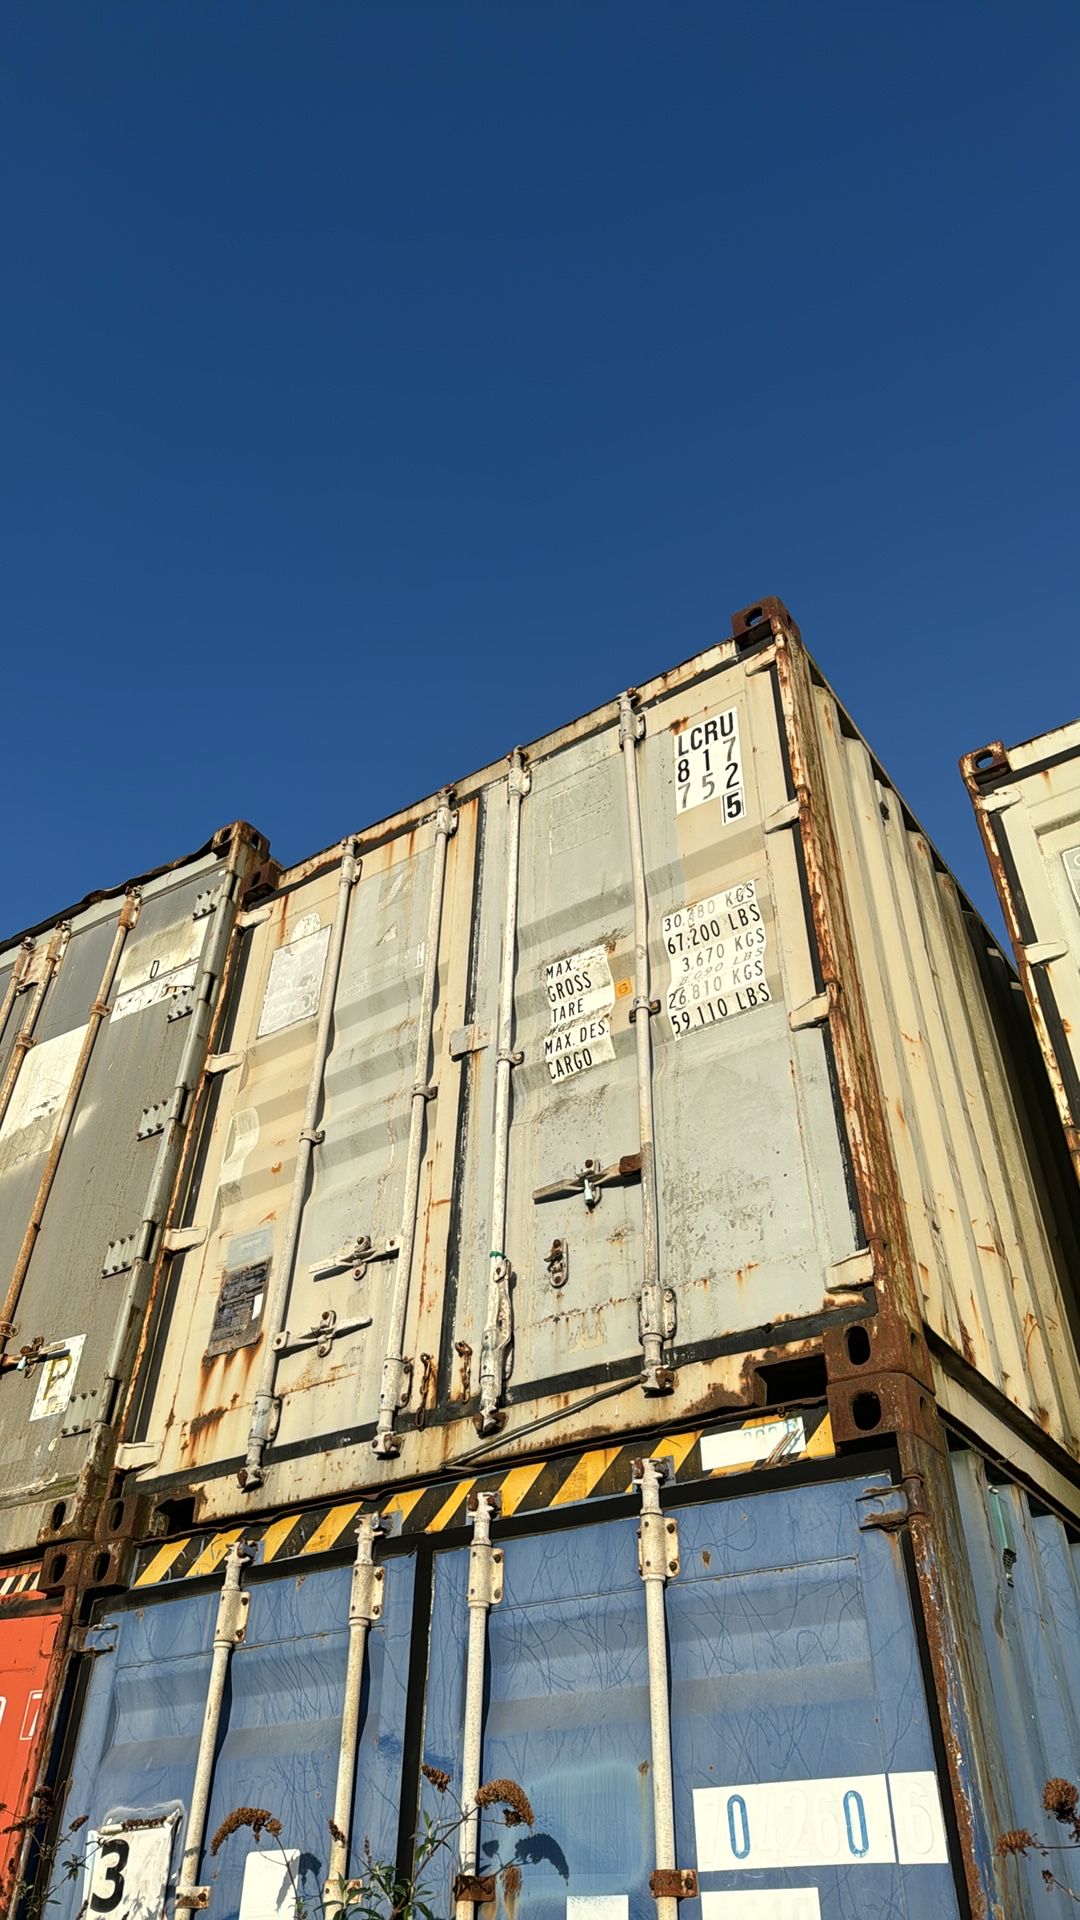 Shipping container, 41 (LCRU8177,525)